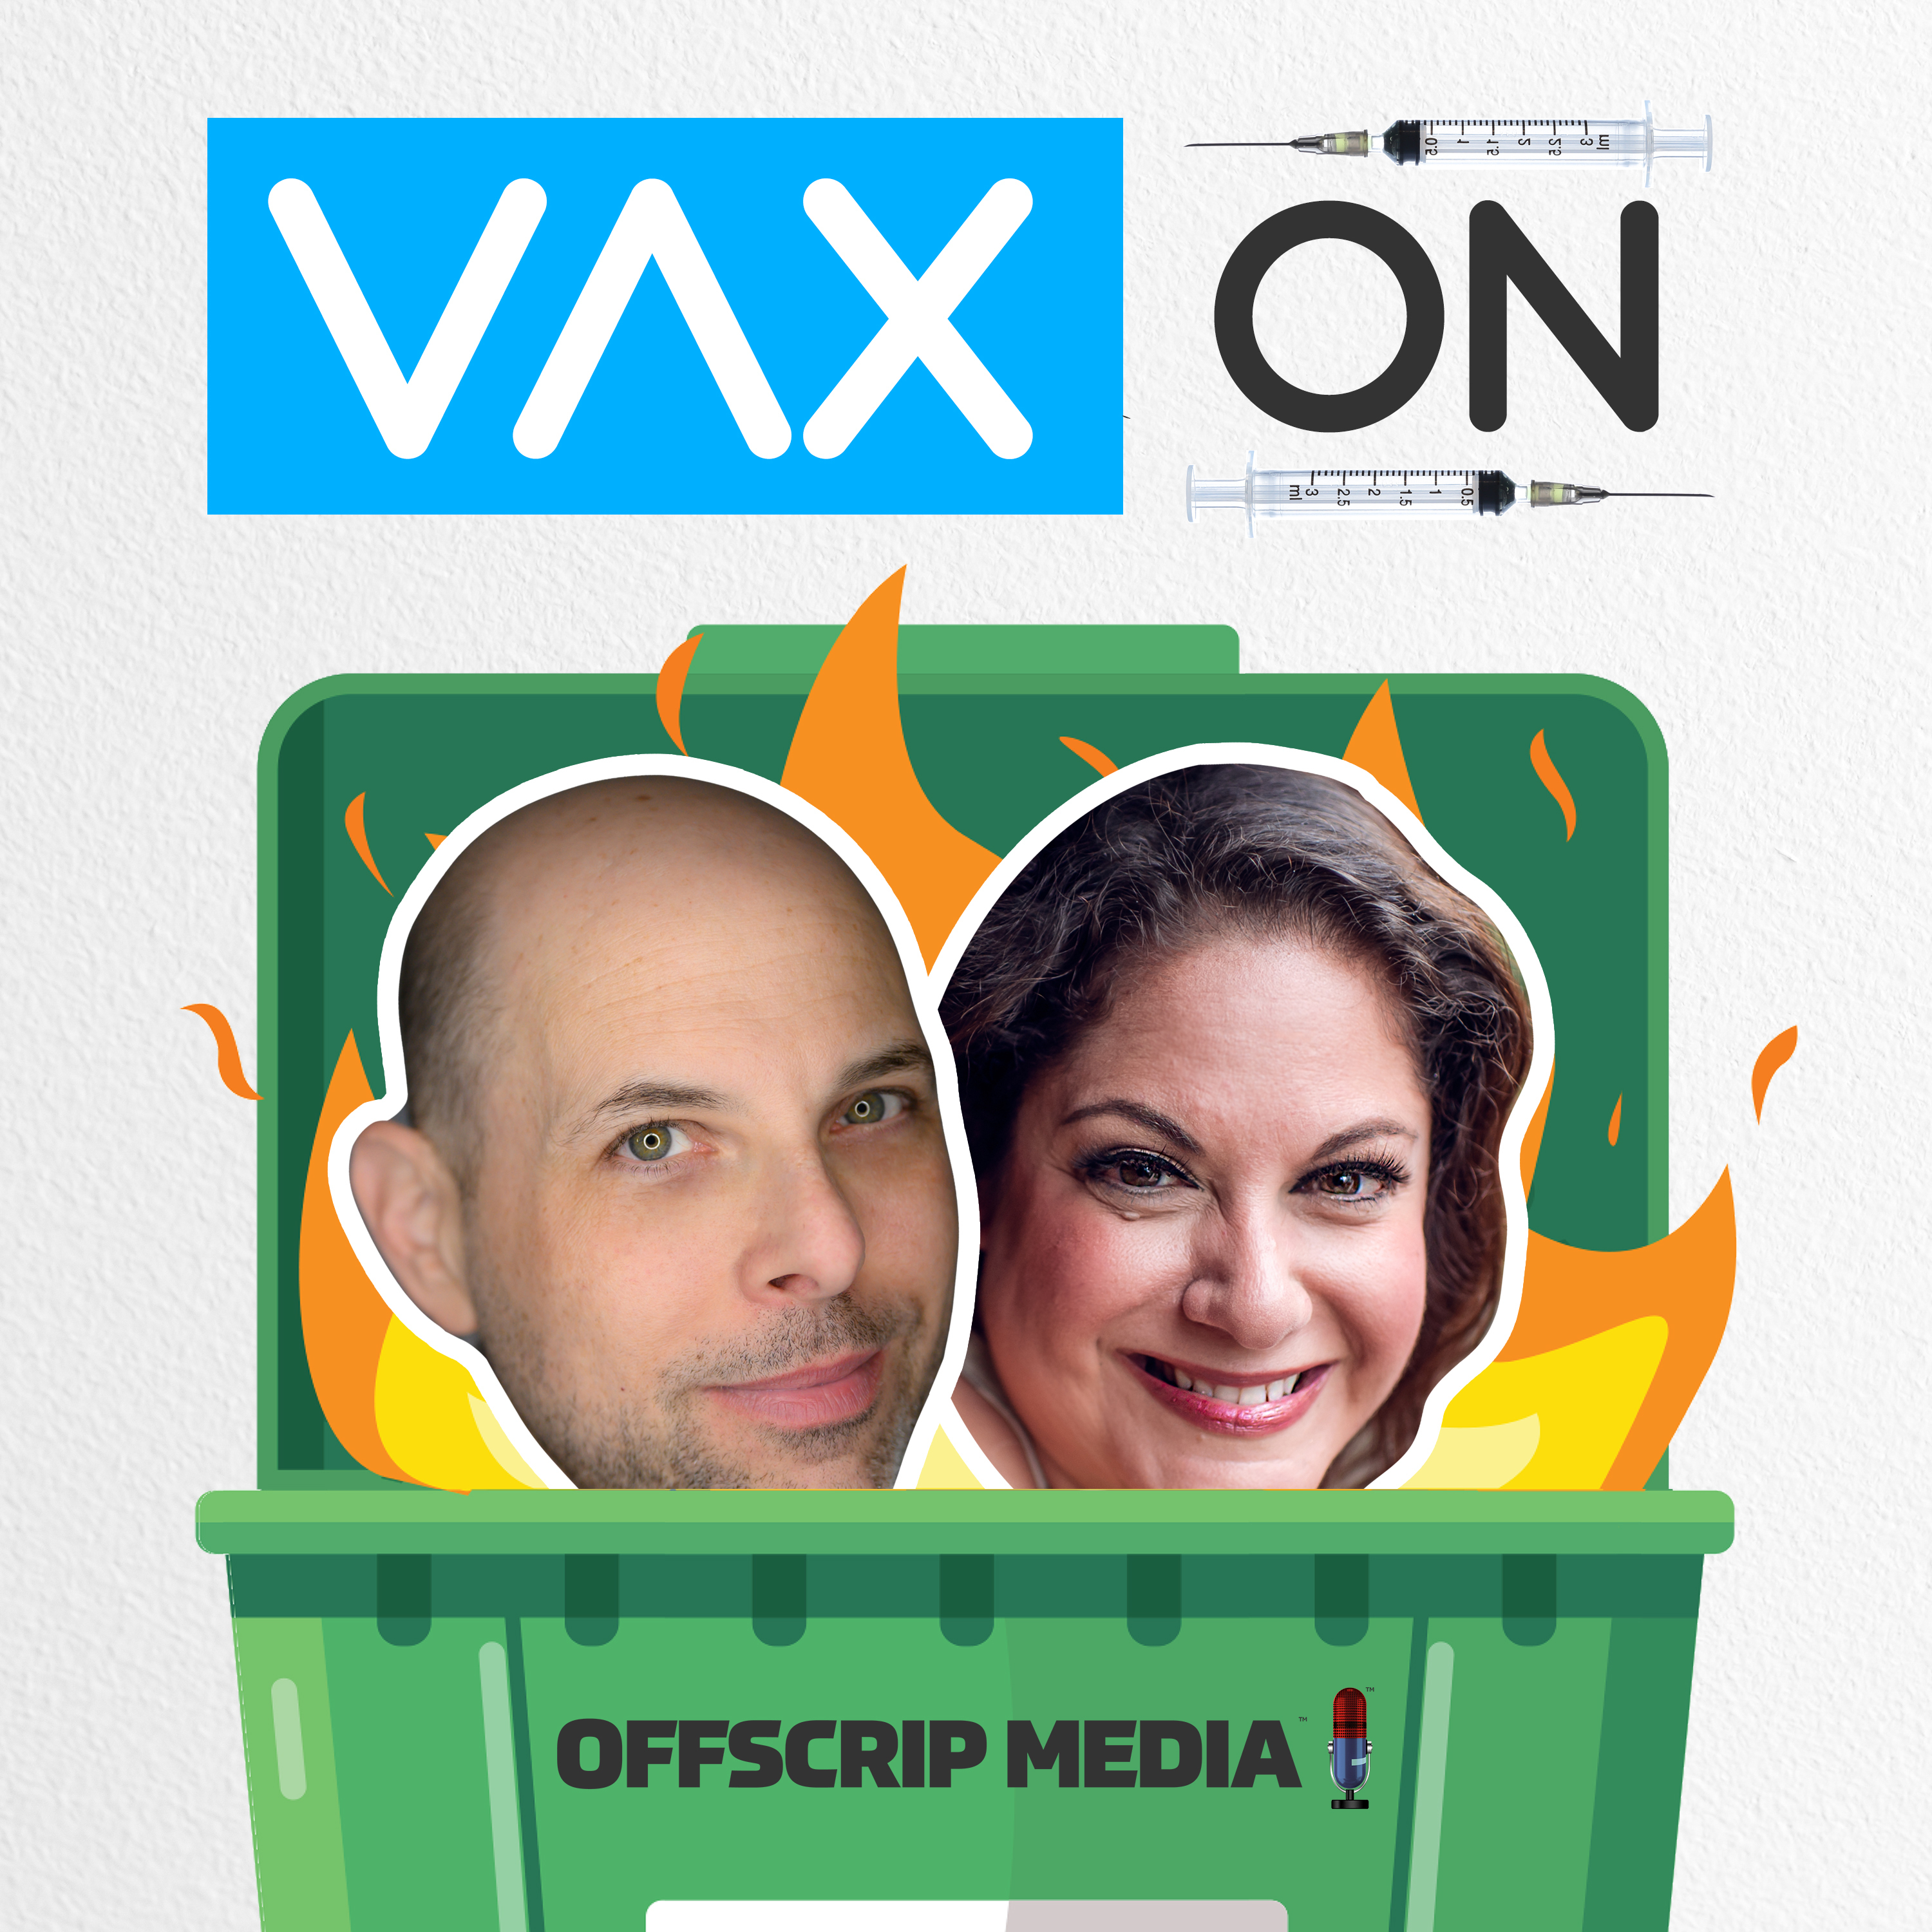 VAX ON: Misinformation, Tourist Enticements, and ‘Impending Doom’